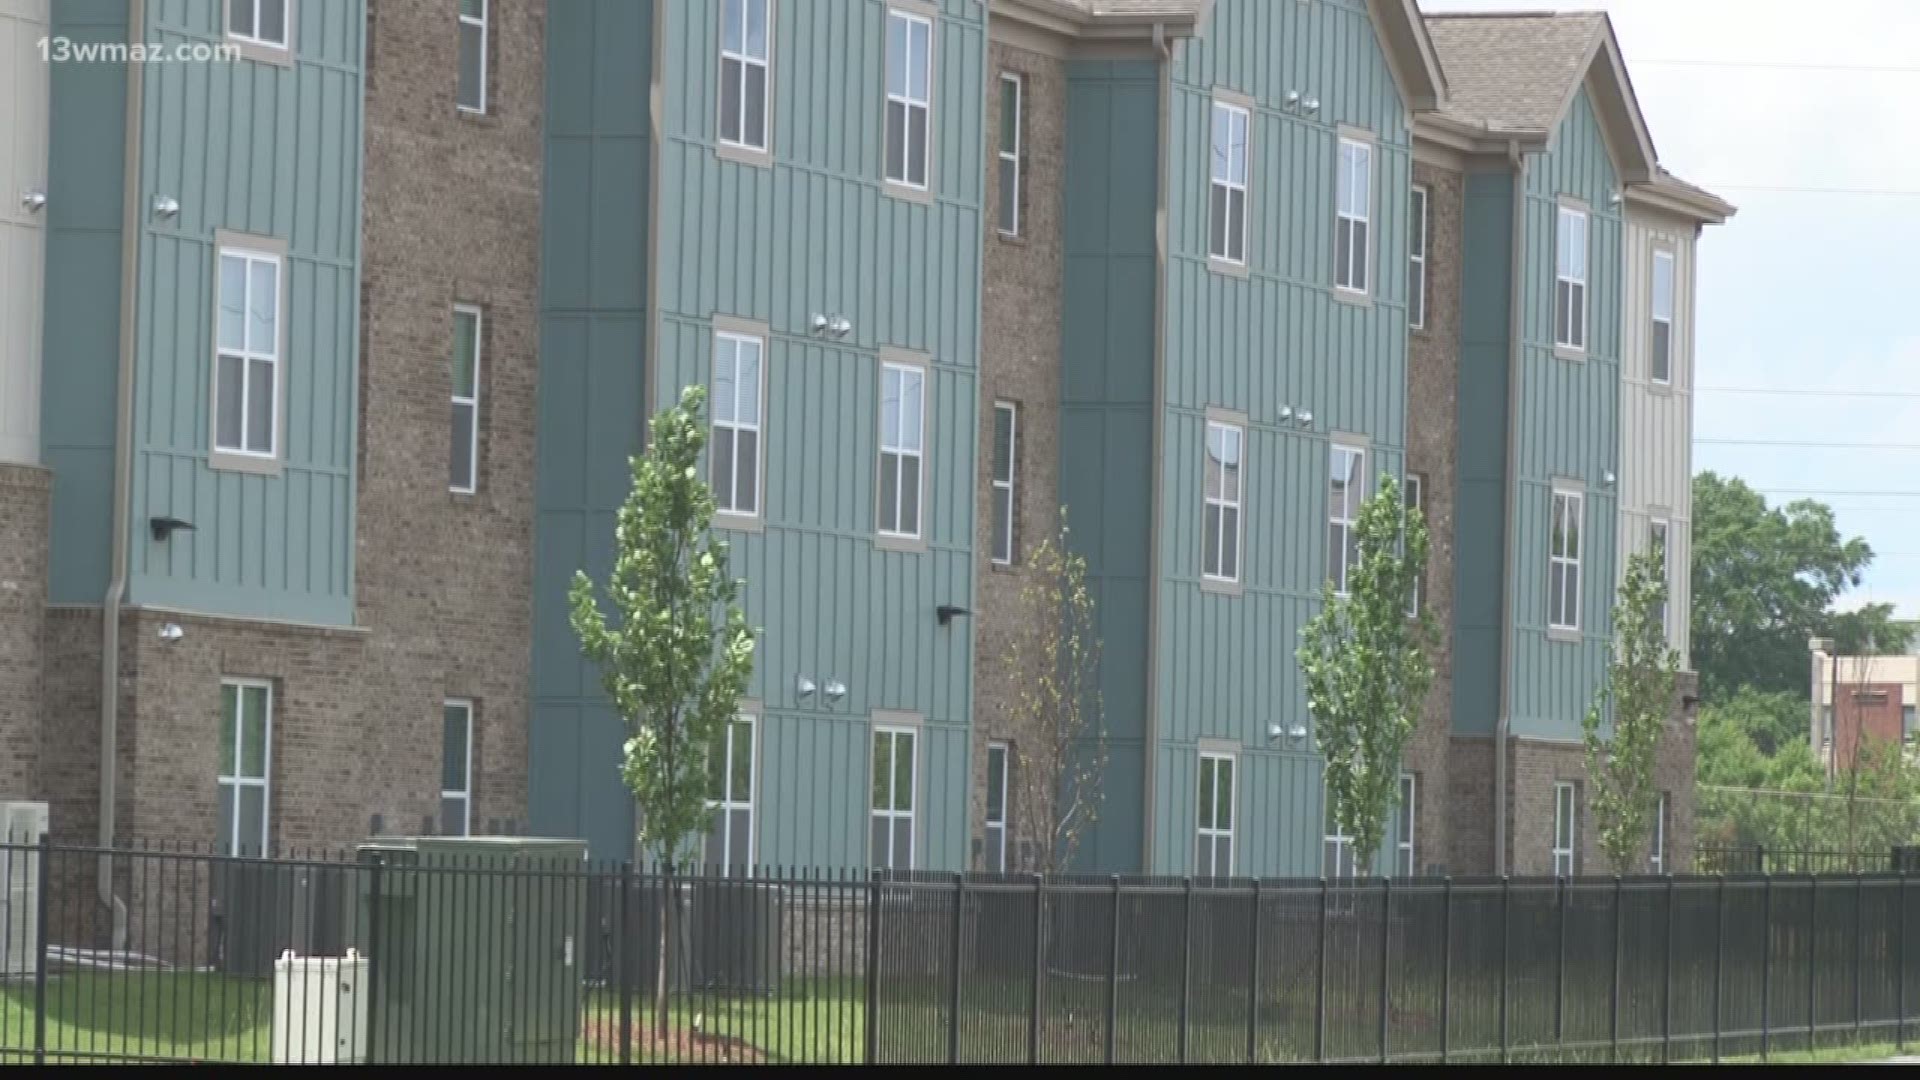 VERIFY: Does affordable housing bring more crime?